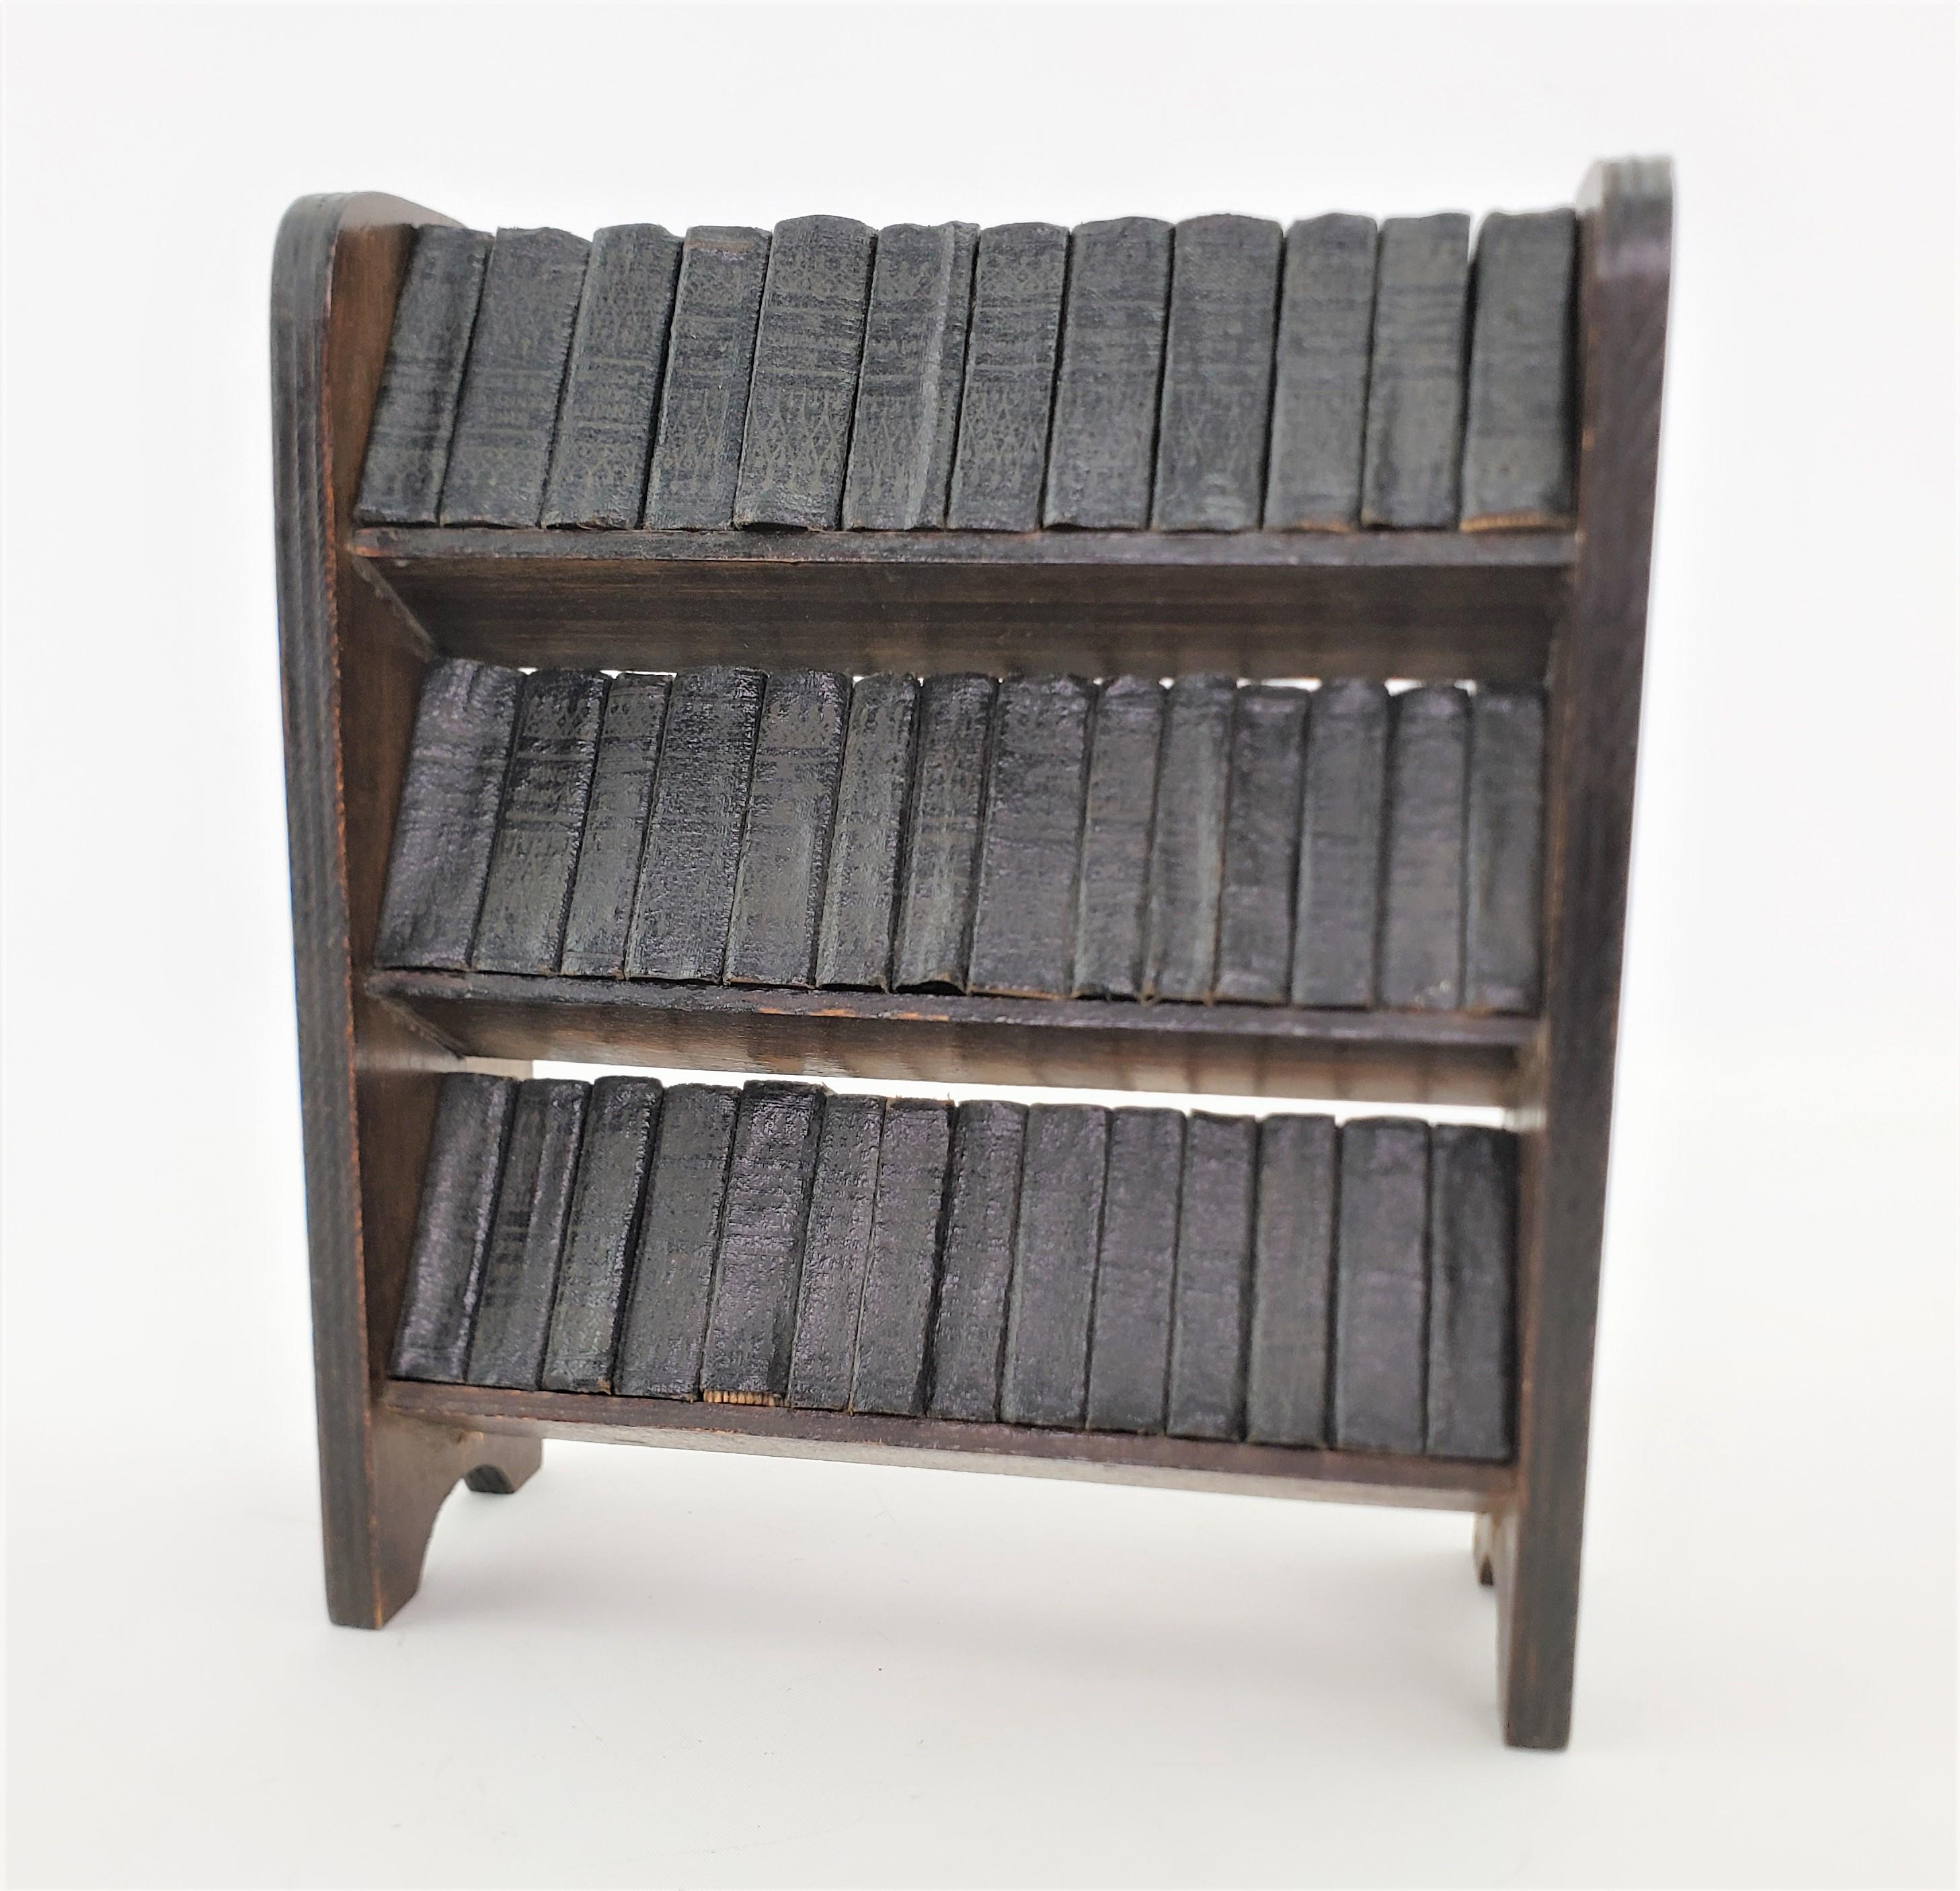 Set of 40 Leather Bound Mini Books of William Shakespeare's Plays with Bookcase For Sale 2